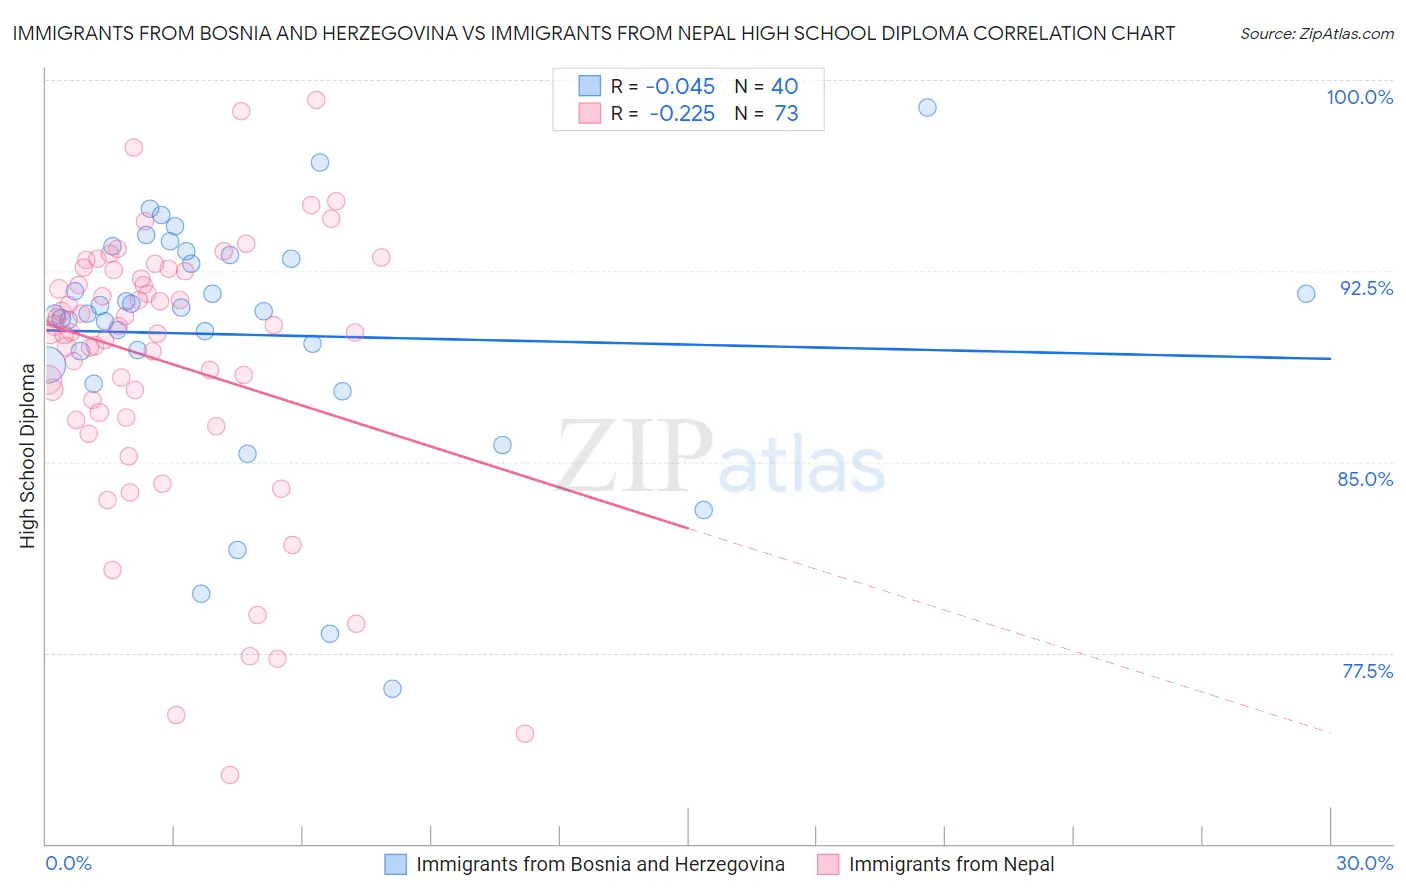 Immigrants from Bosnia and Herzegovina vs Immigrants from Nepal High School Diploma